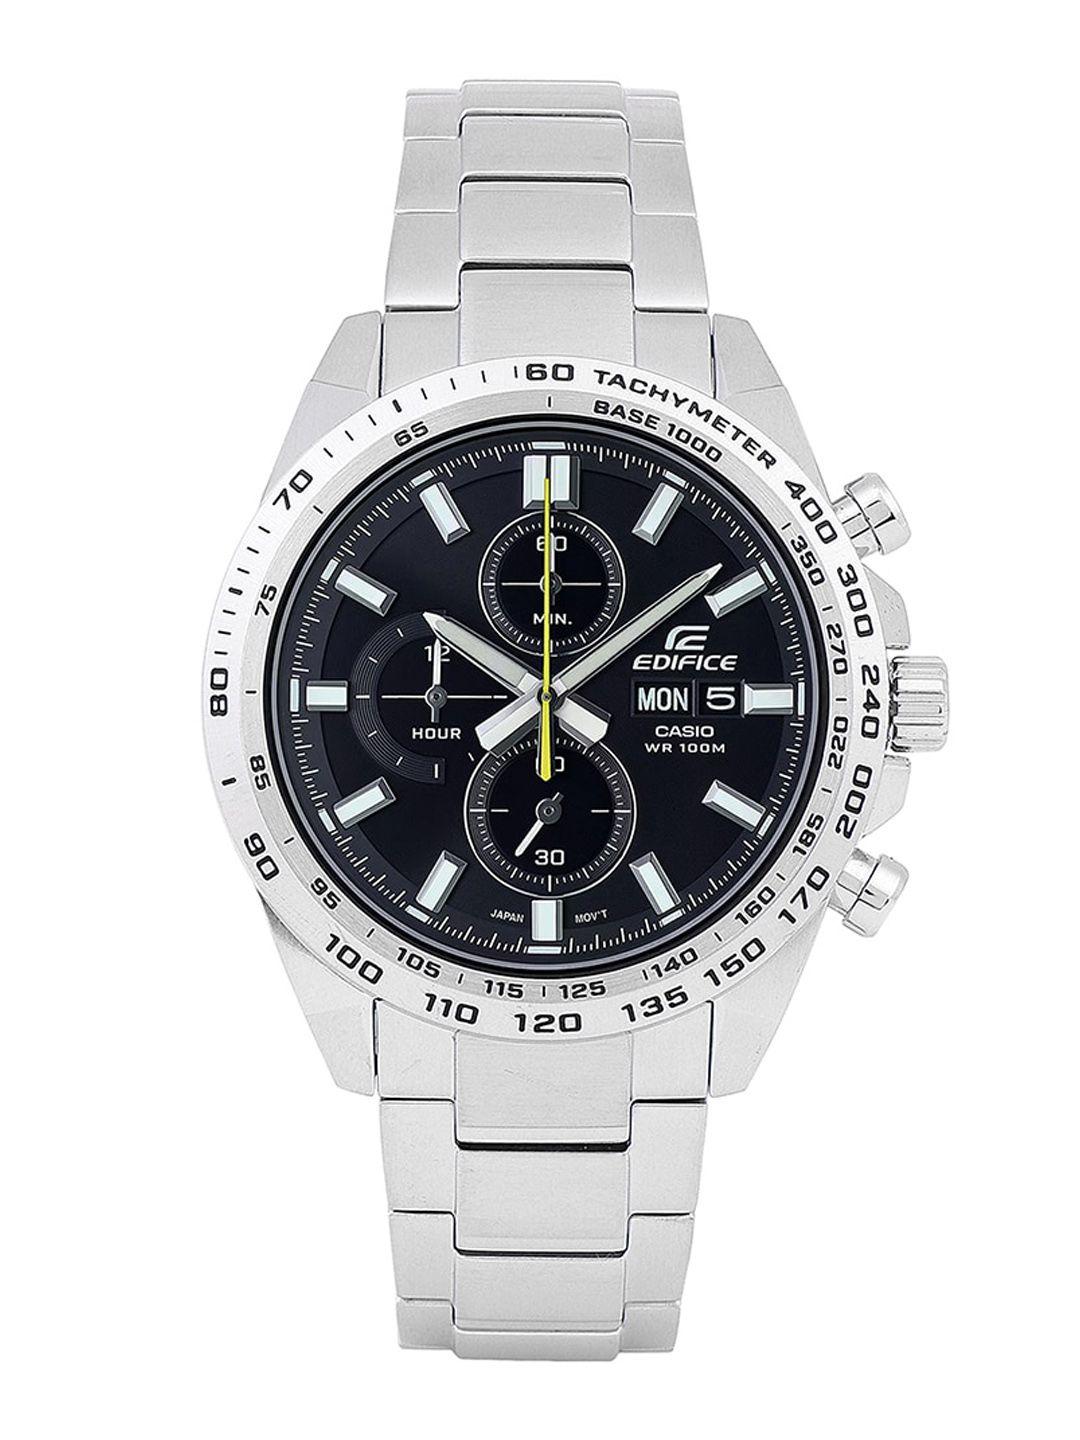 casio-edifice-men-stainless-steel-straps-analogue-chronograph-watch-ed593